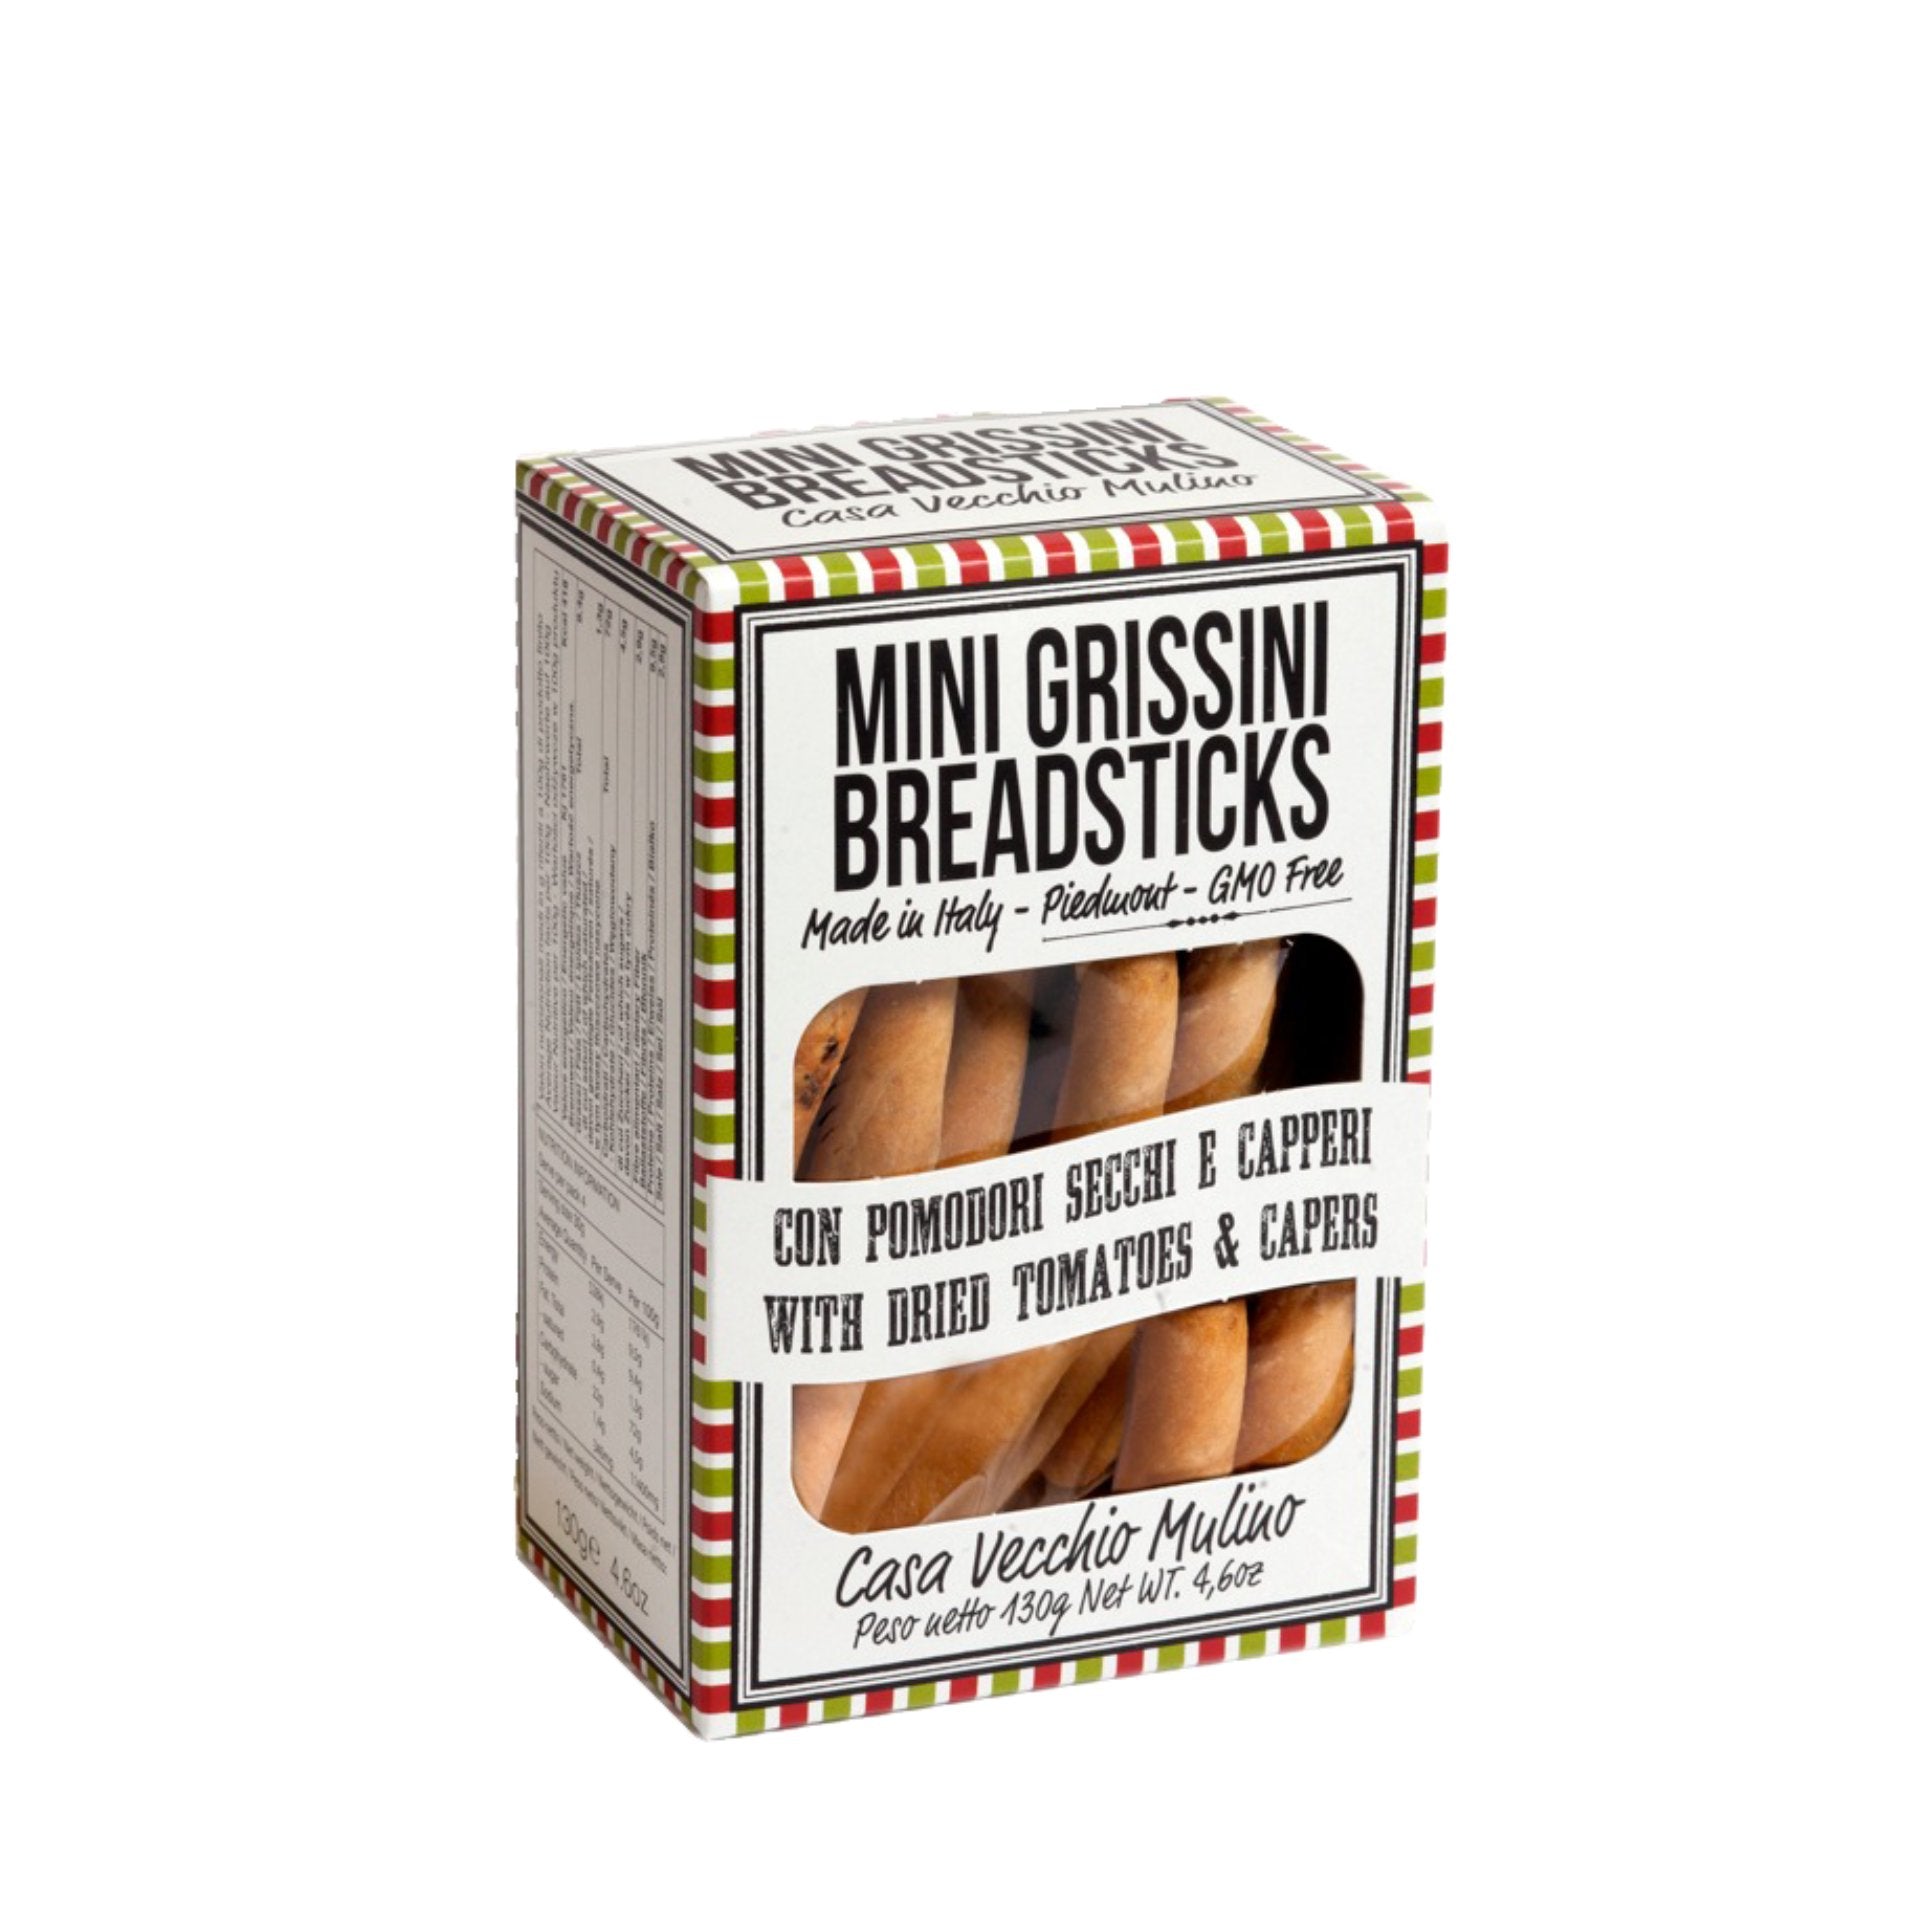 Casa Vecchio Mulino Mini Grissini with Tomatoes & Capers 130g  | Imported and distributed in the UK by Just Gourmet Foods